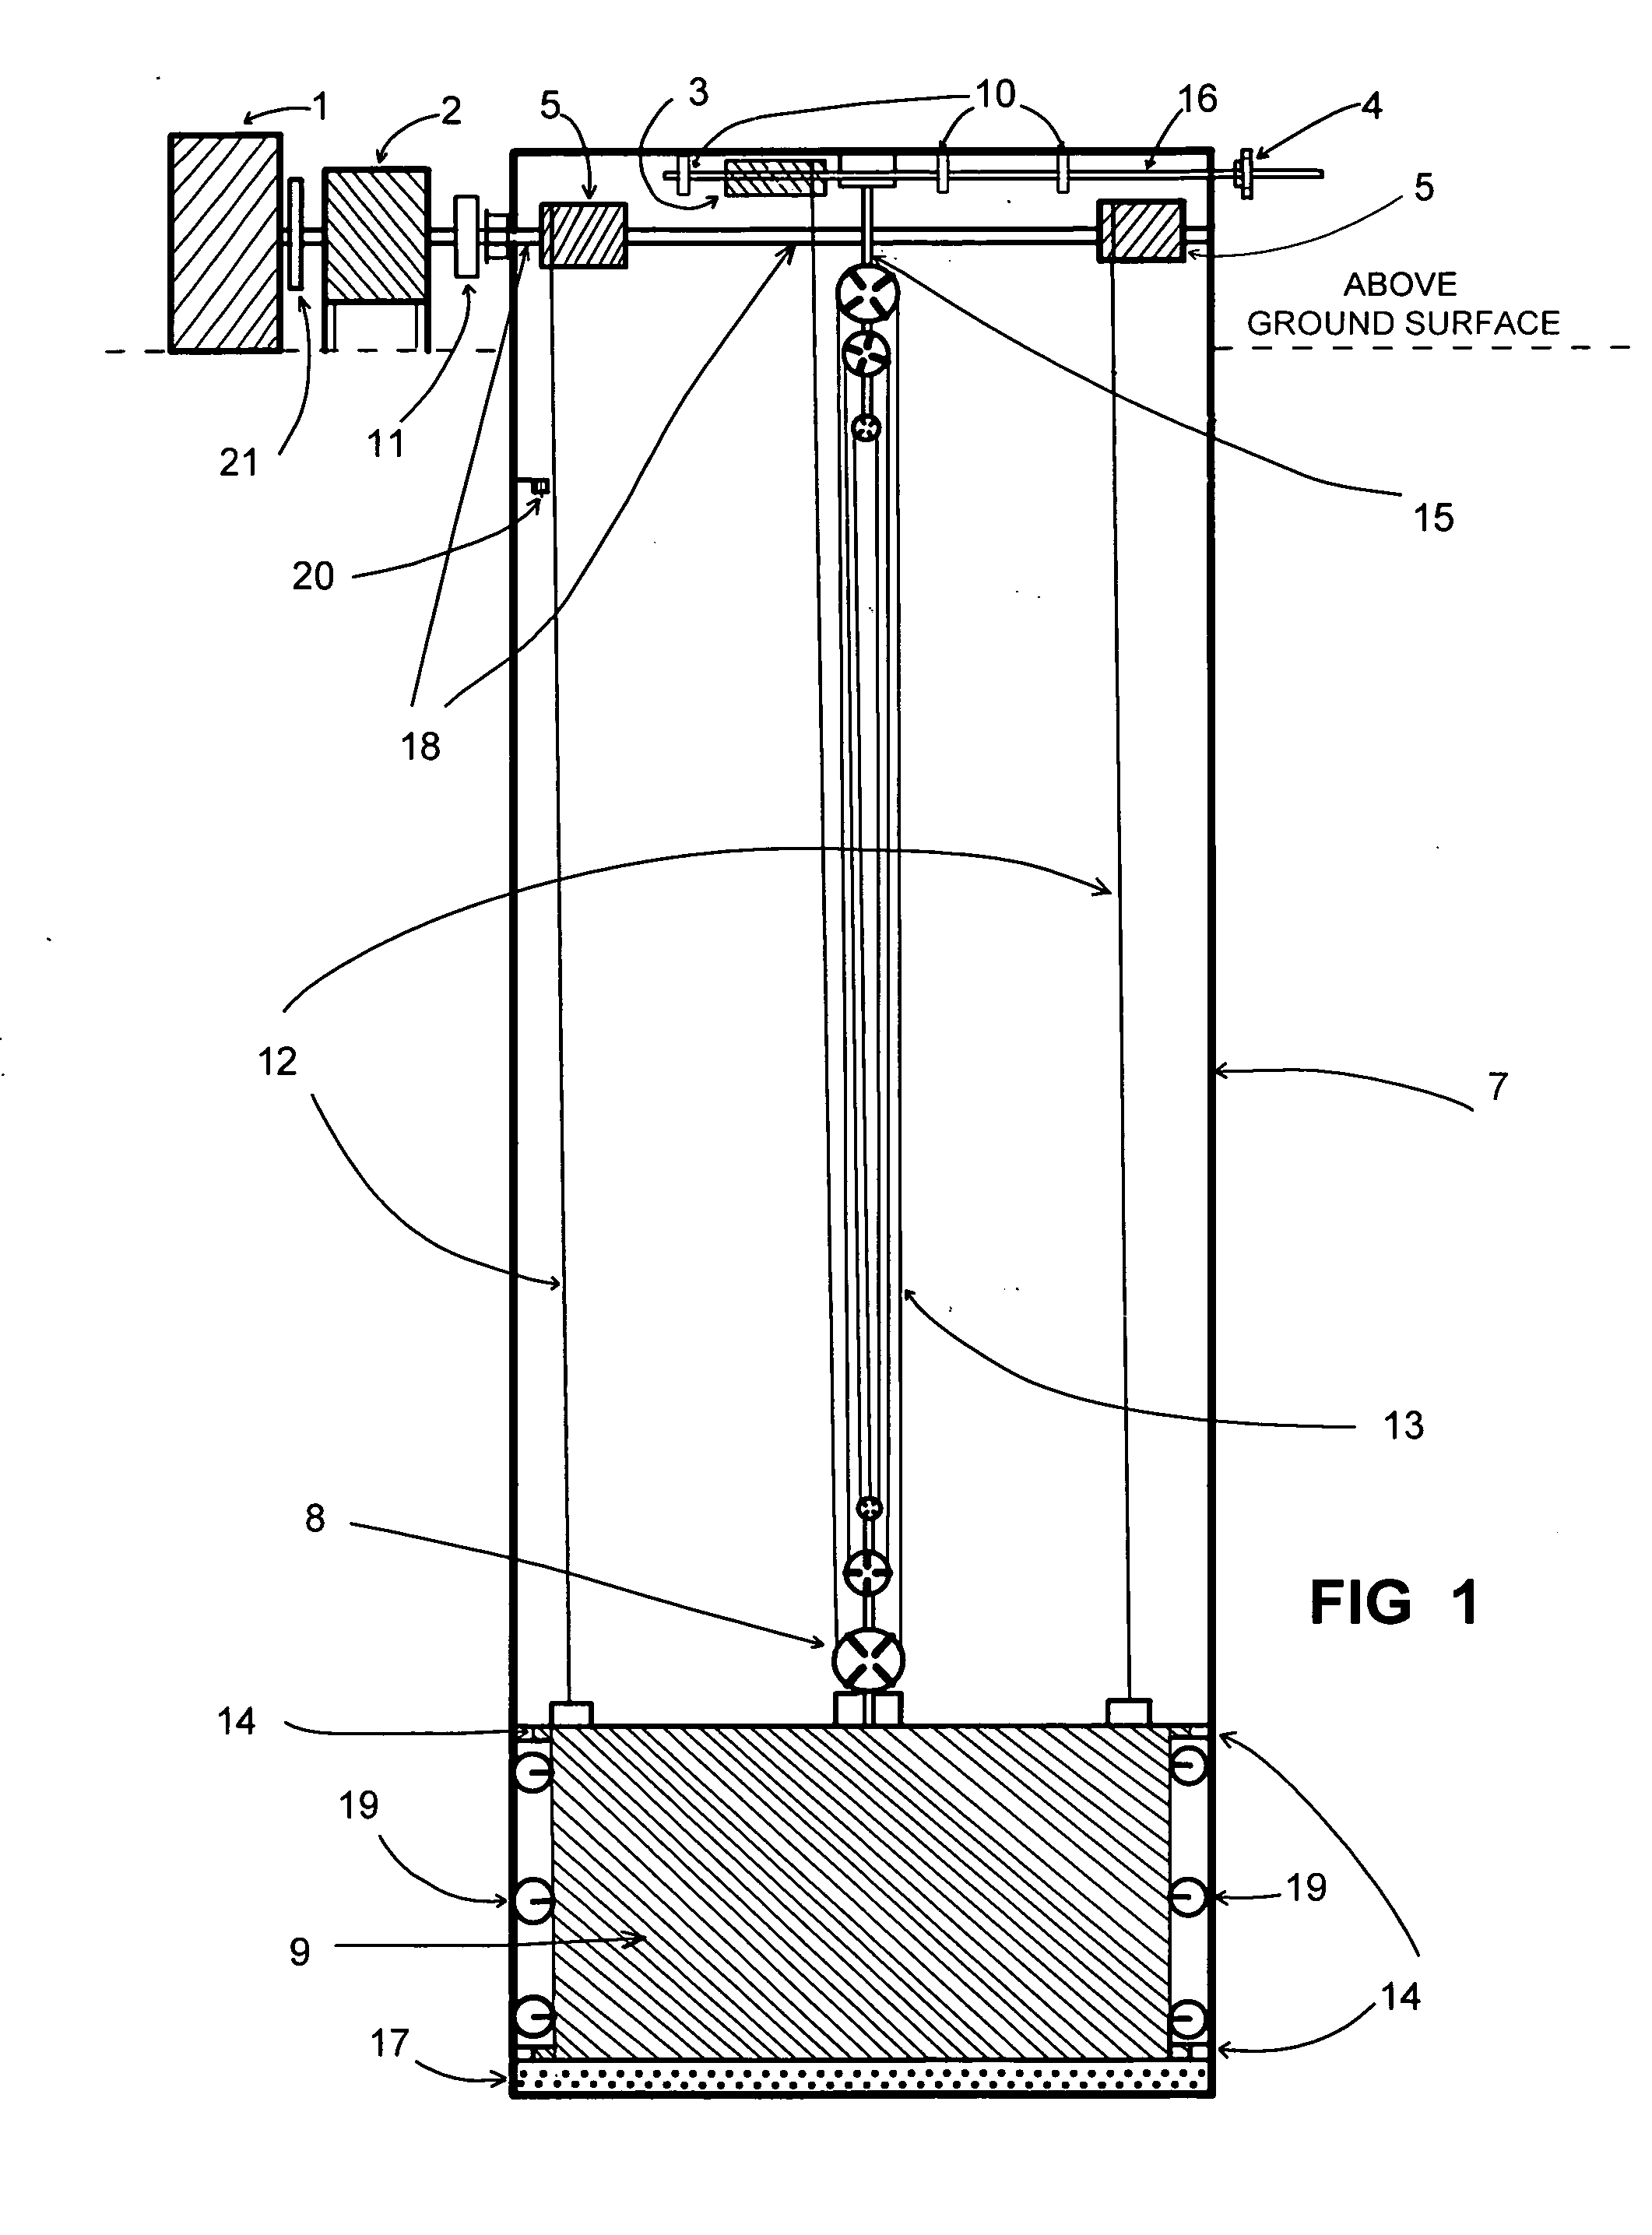 Gravity energy storage and generating device